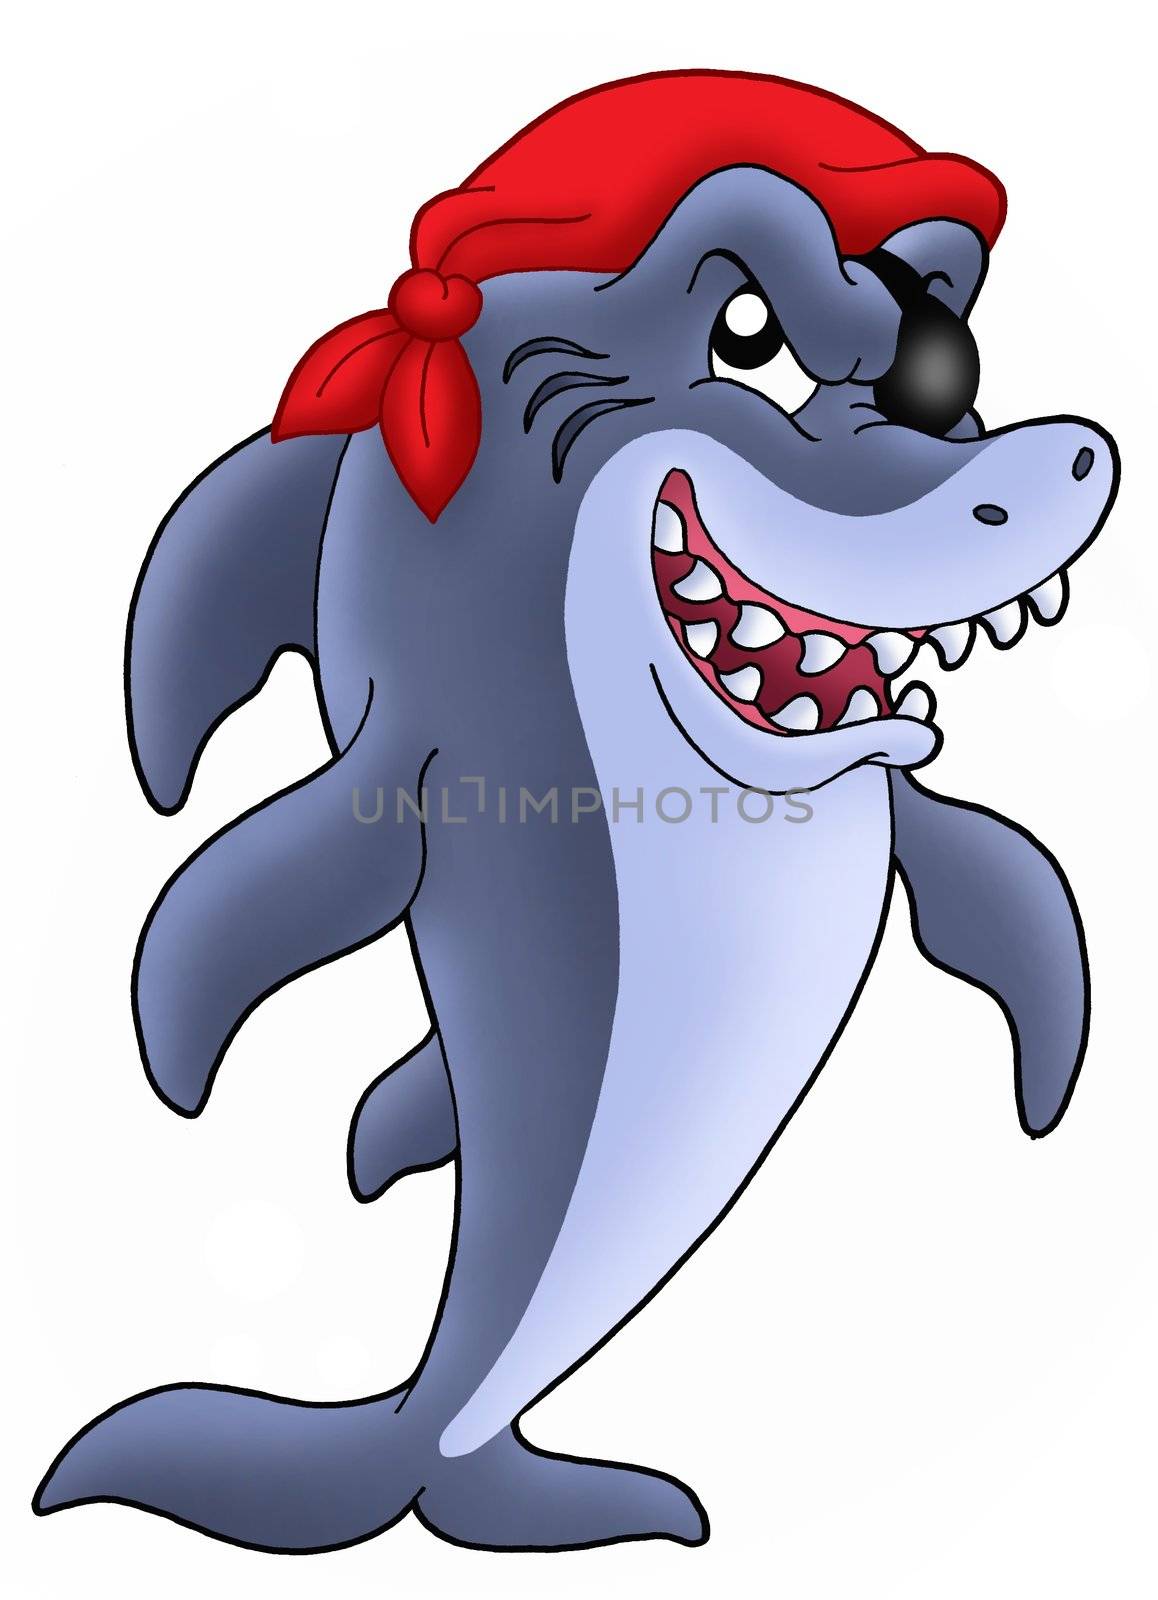 Pirate shark by clairev